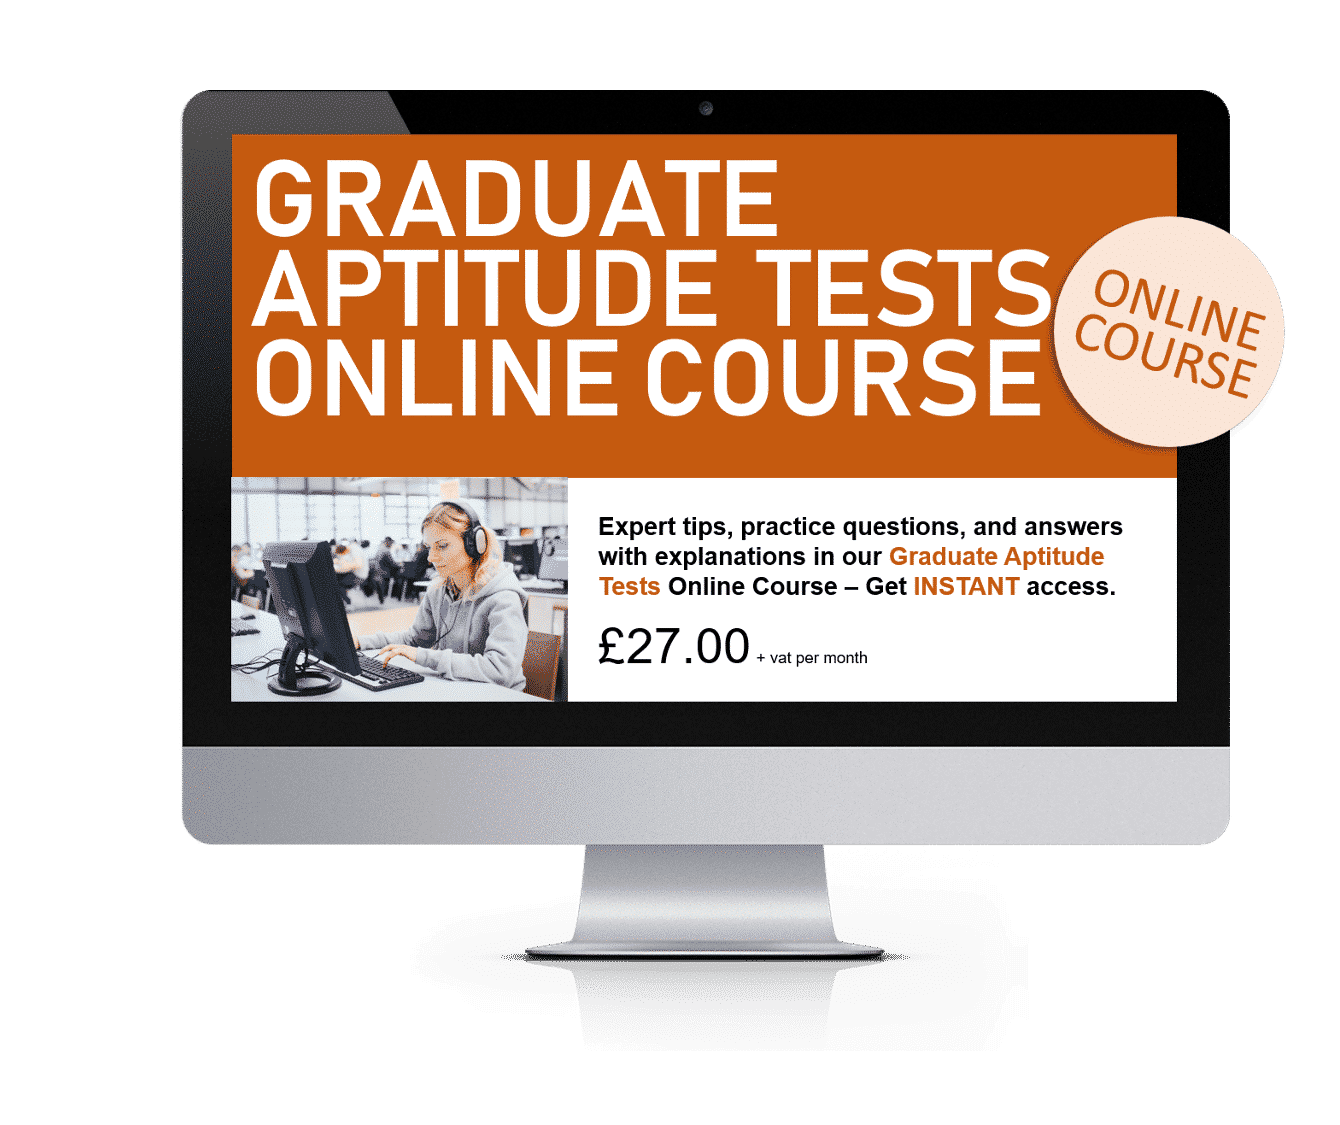 online-graduate-aptitude-tests-course-14-day-free-trial-thereafter-27-vat-per-month-how-2